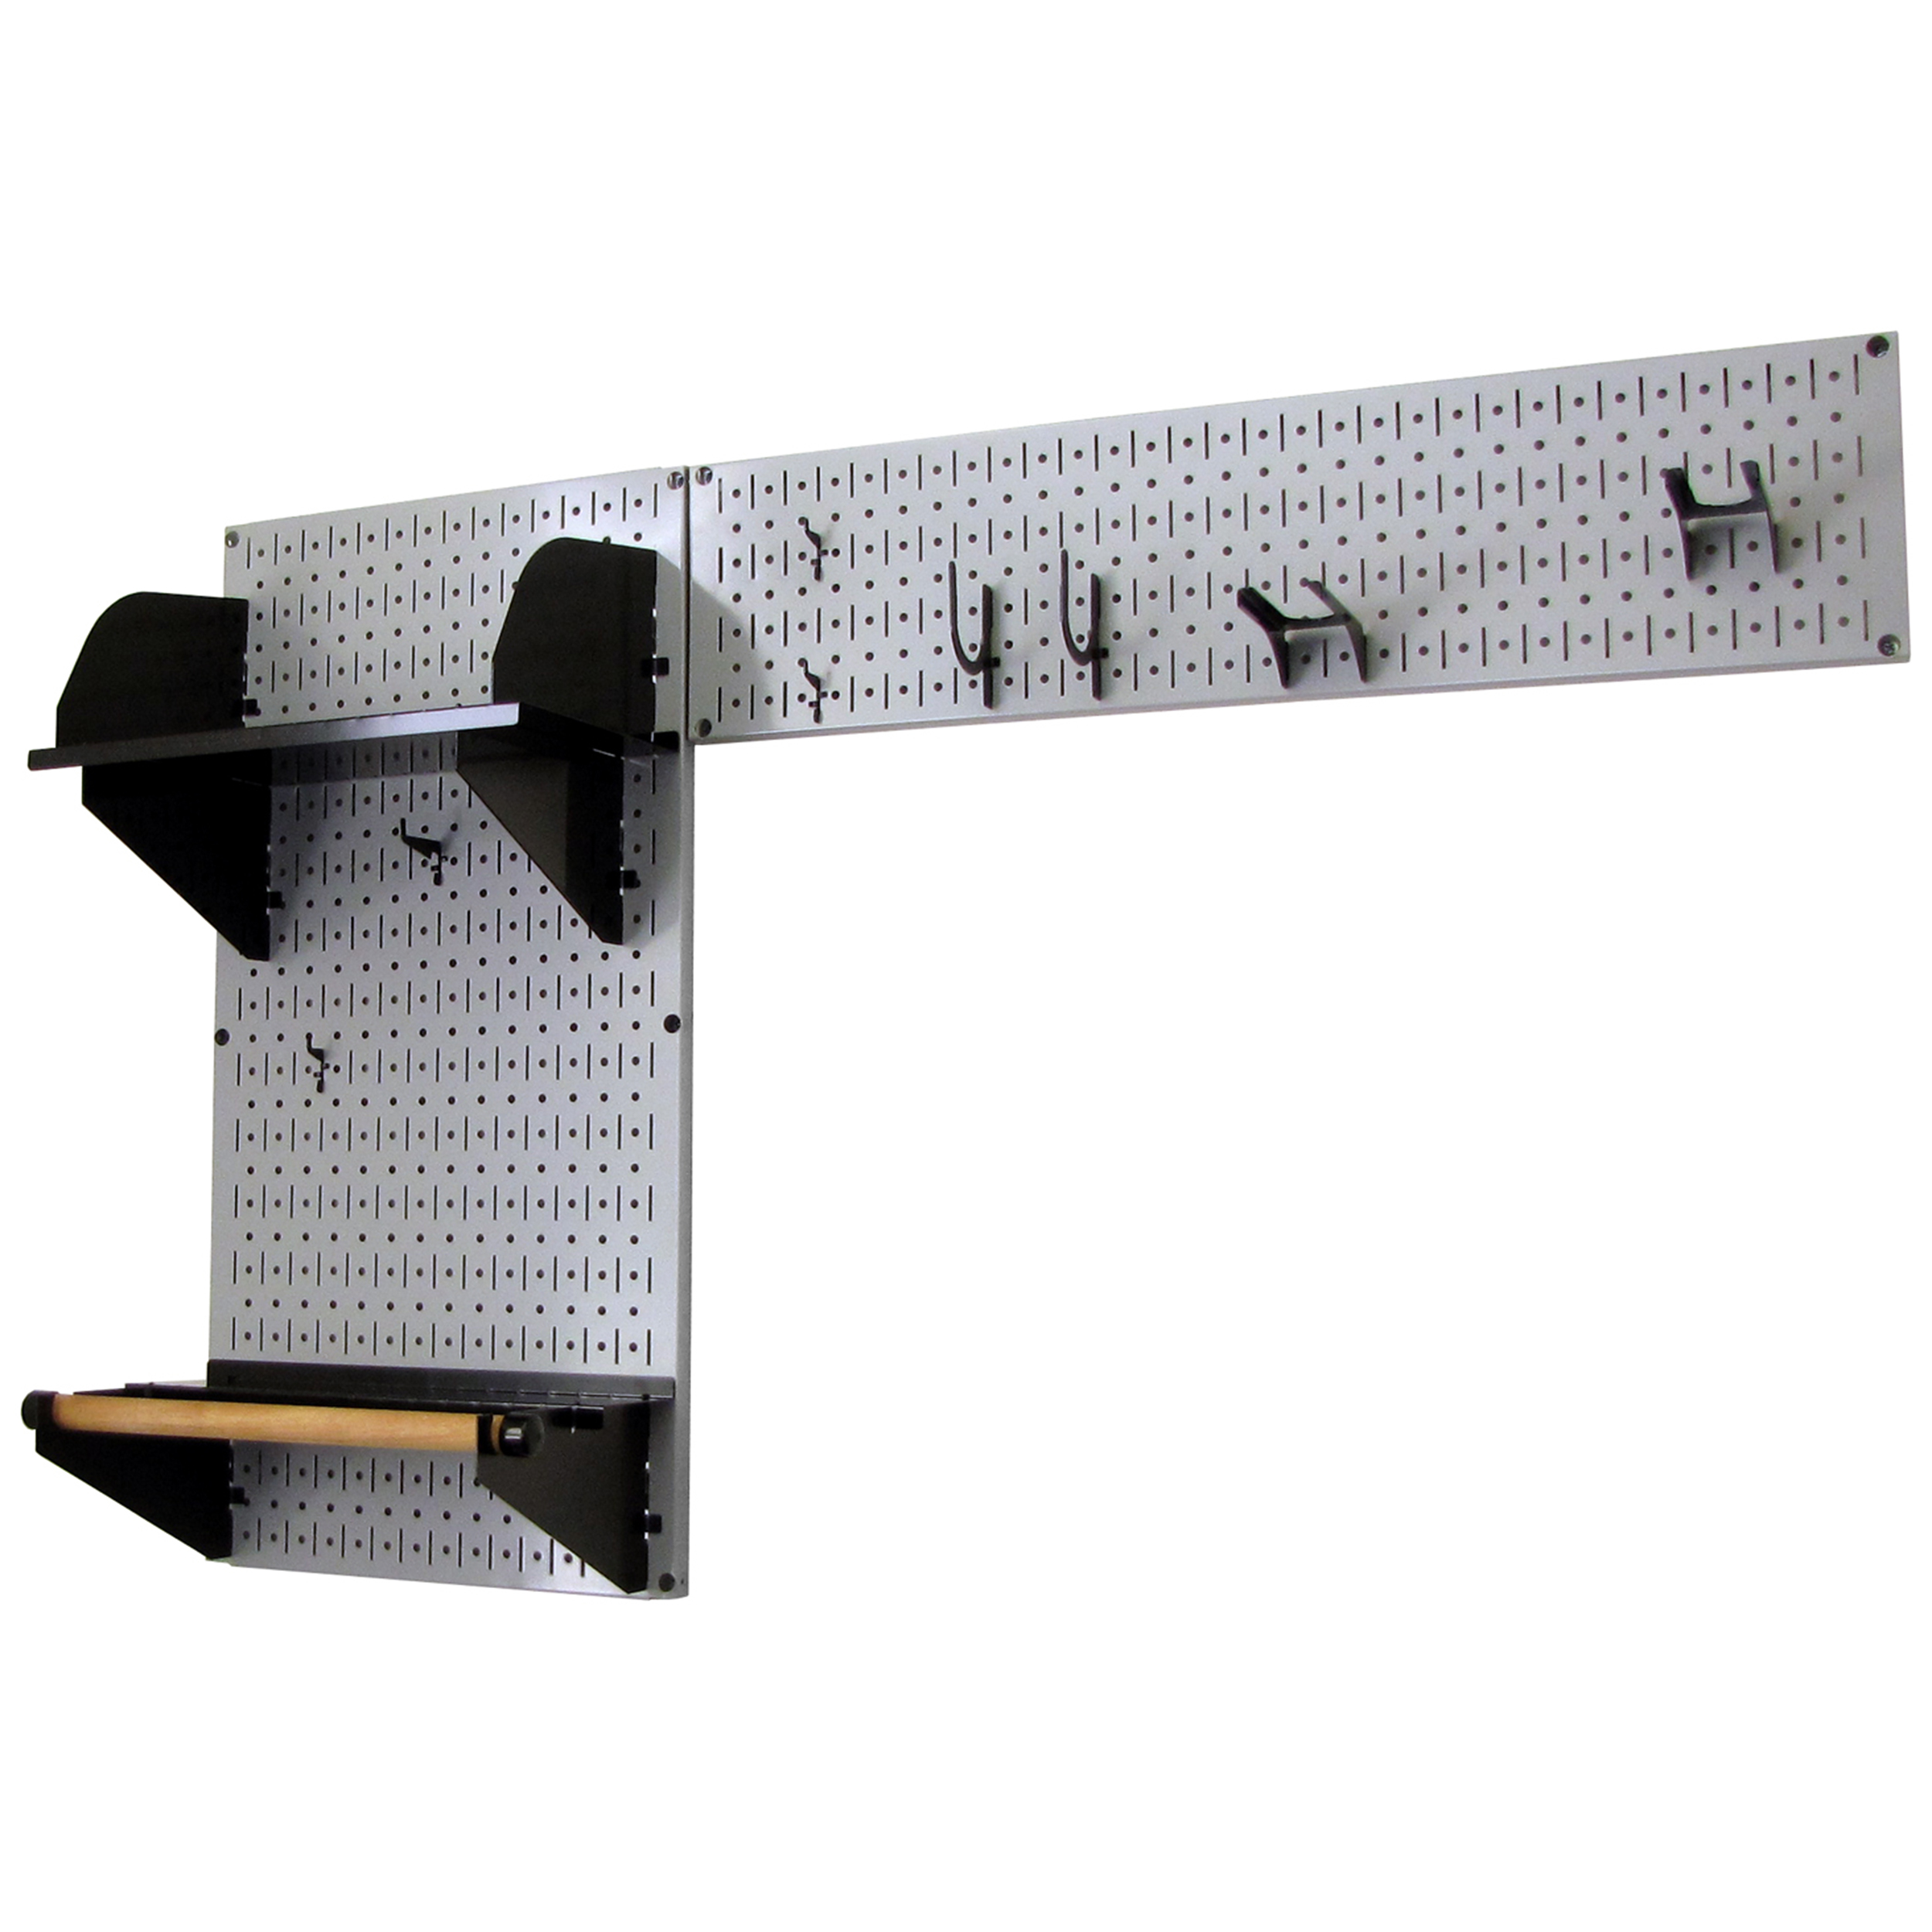 Pegboard Garden Tool Board Organizer With Gray Pegboard And Black Accessories